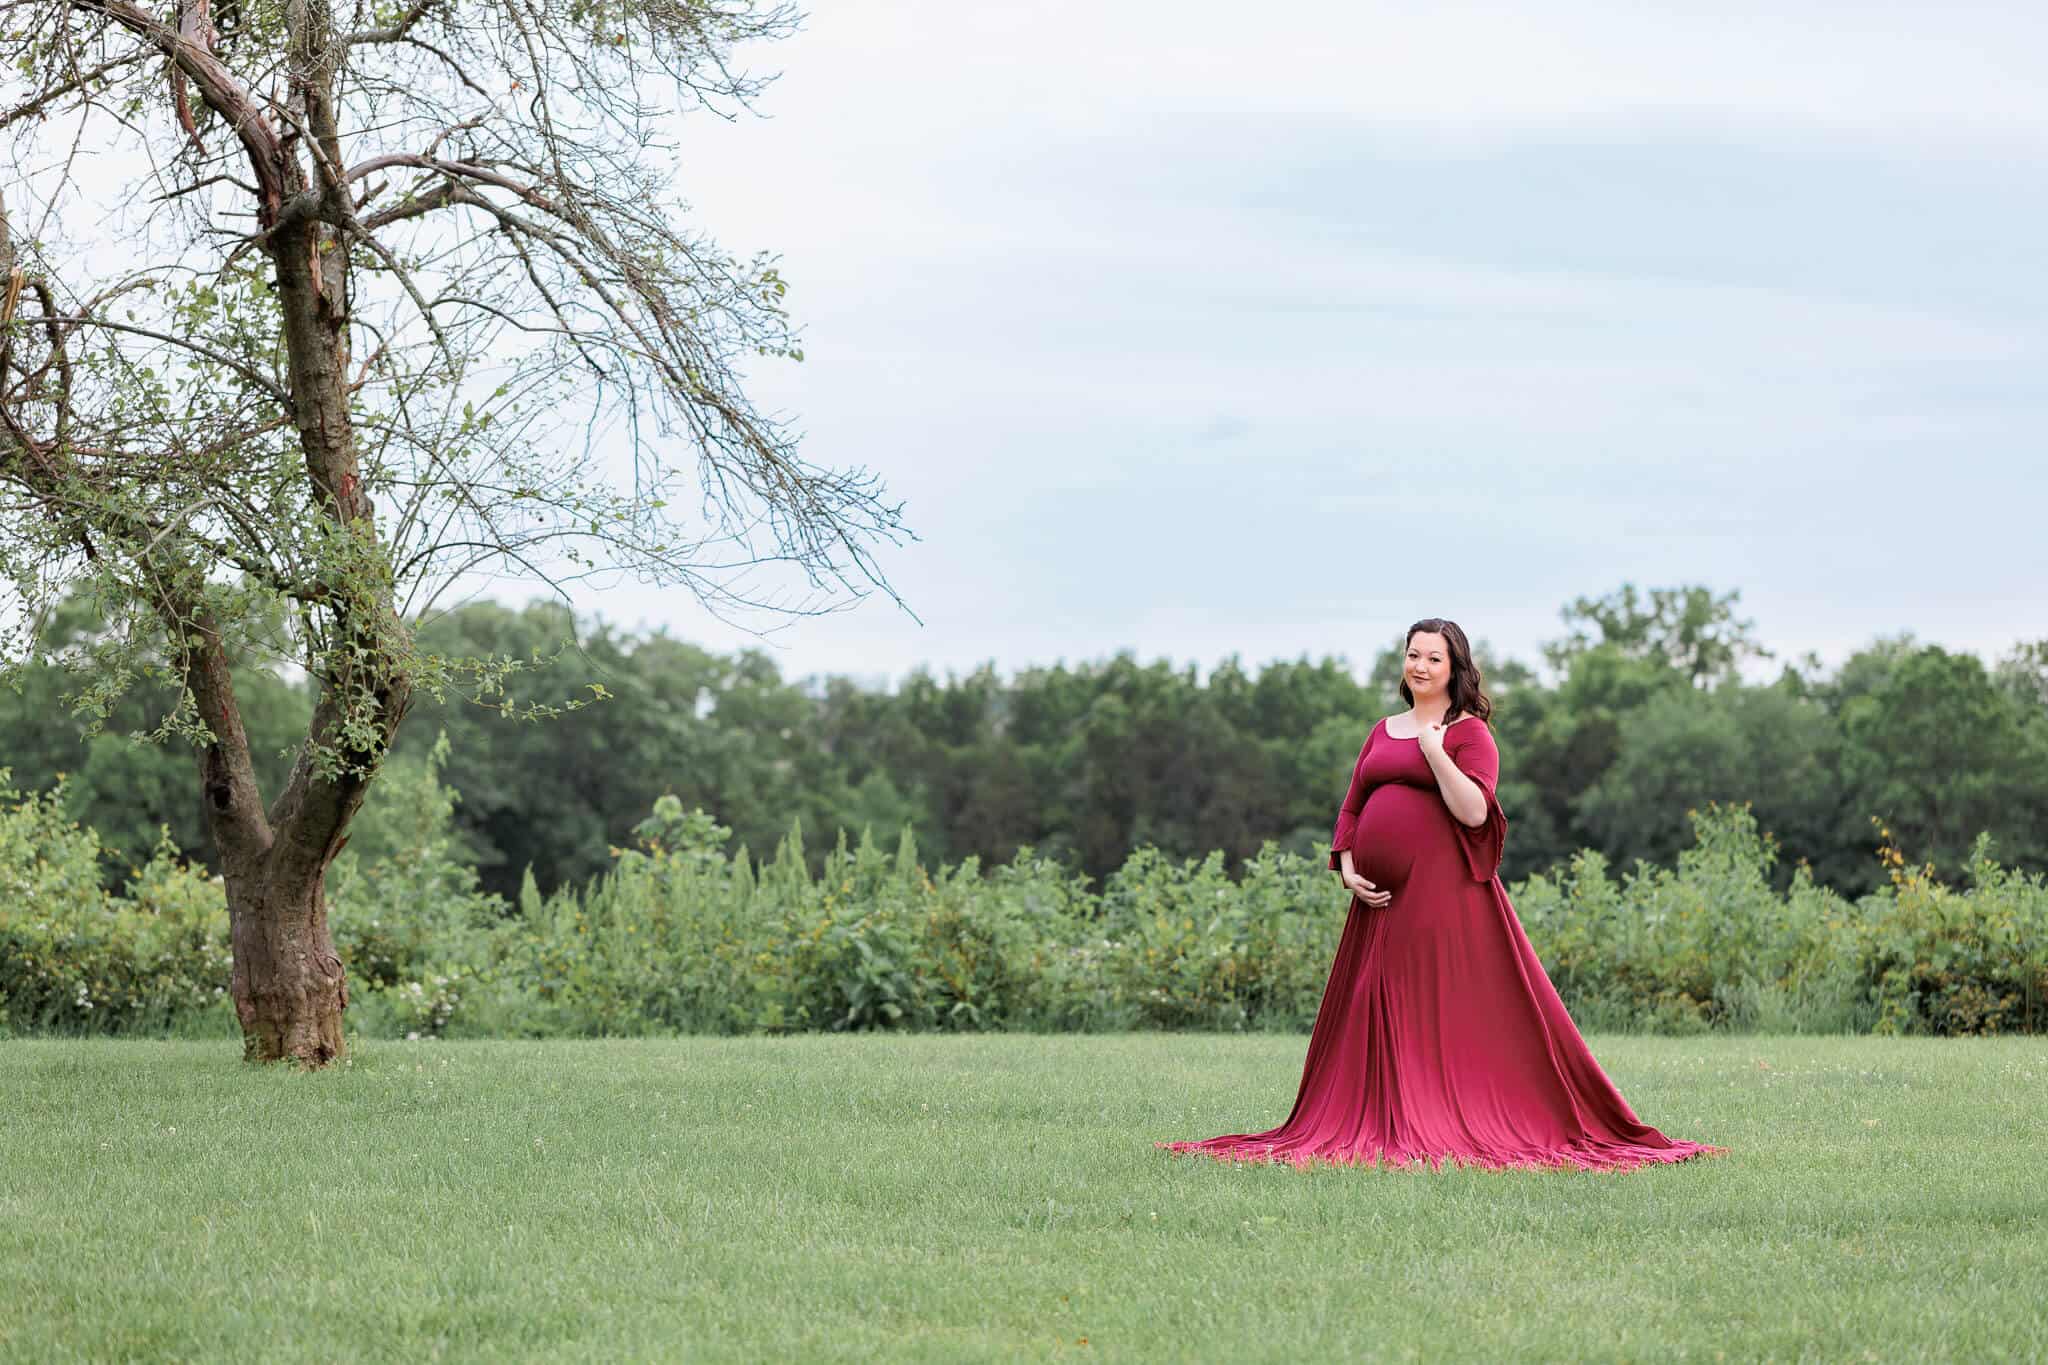 A blog about Centreville OB/GYN featuring a mother-to-be in a red dress standing in a field near a tree.